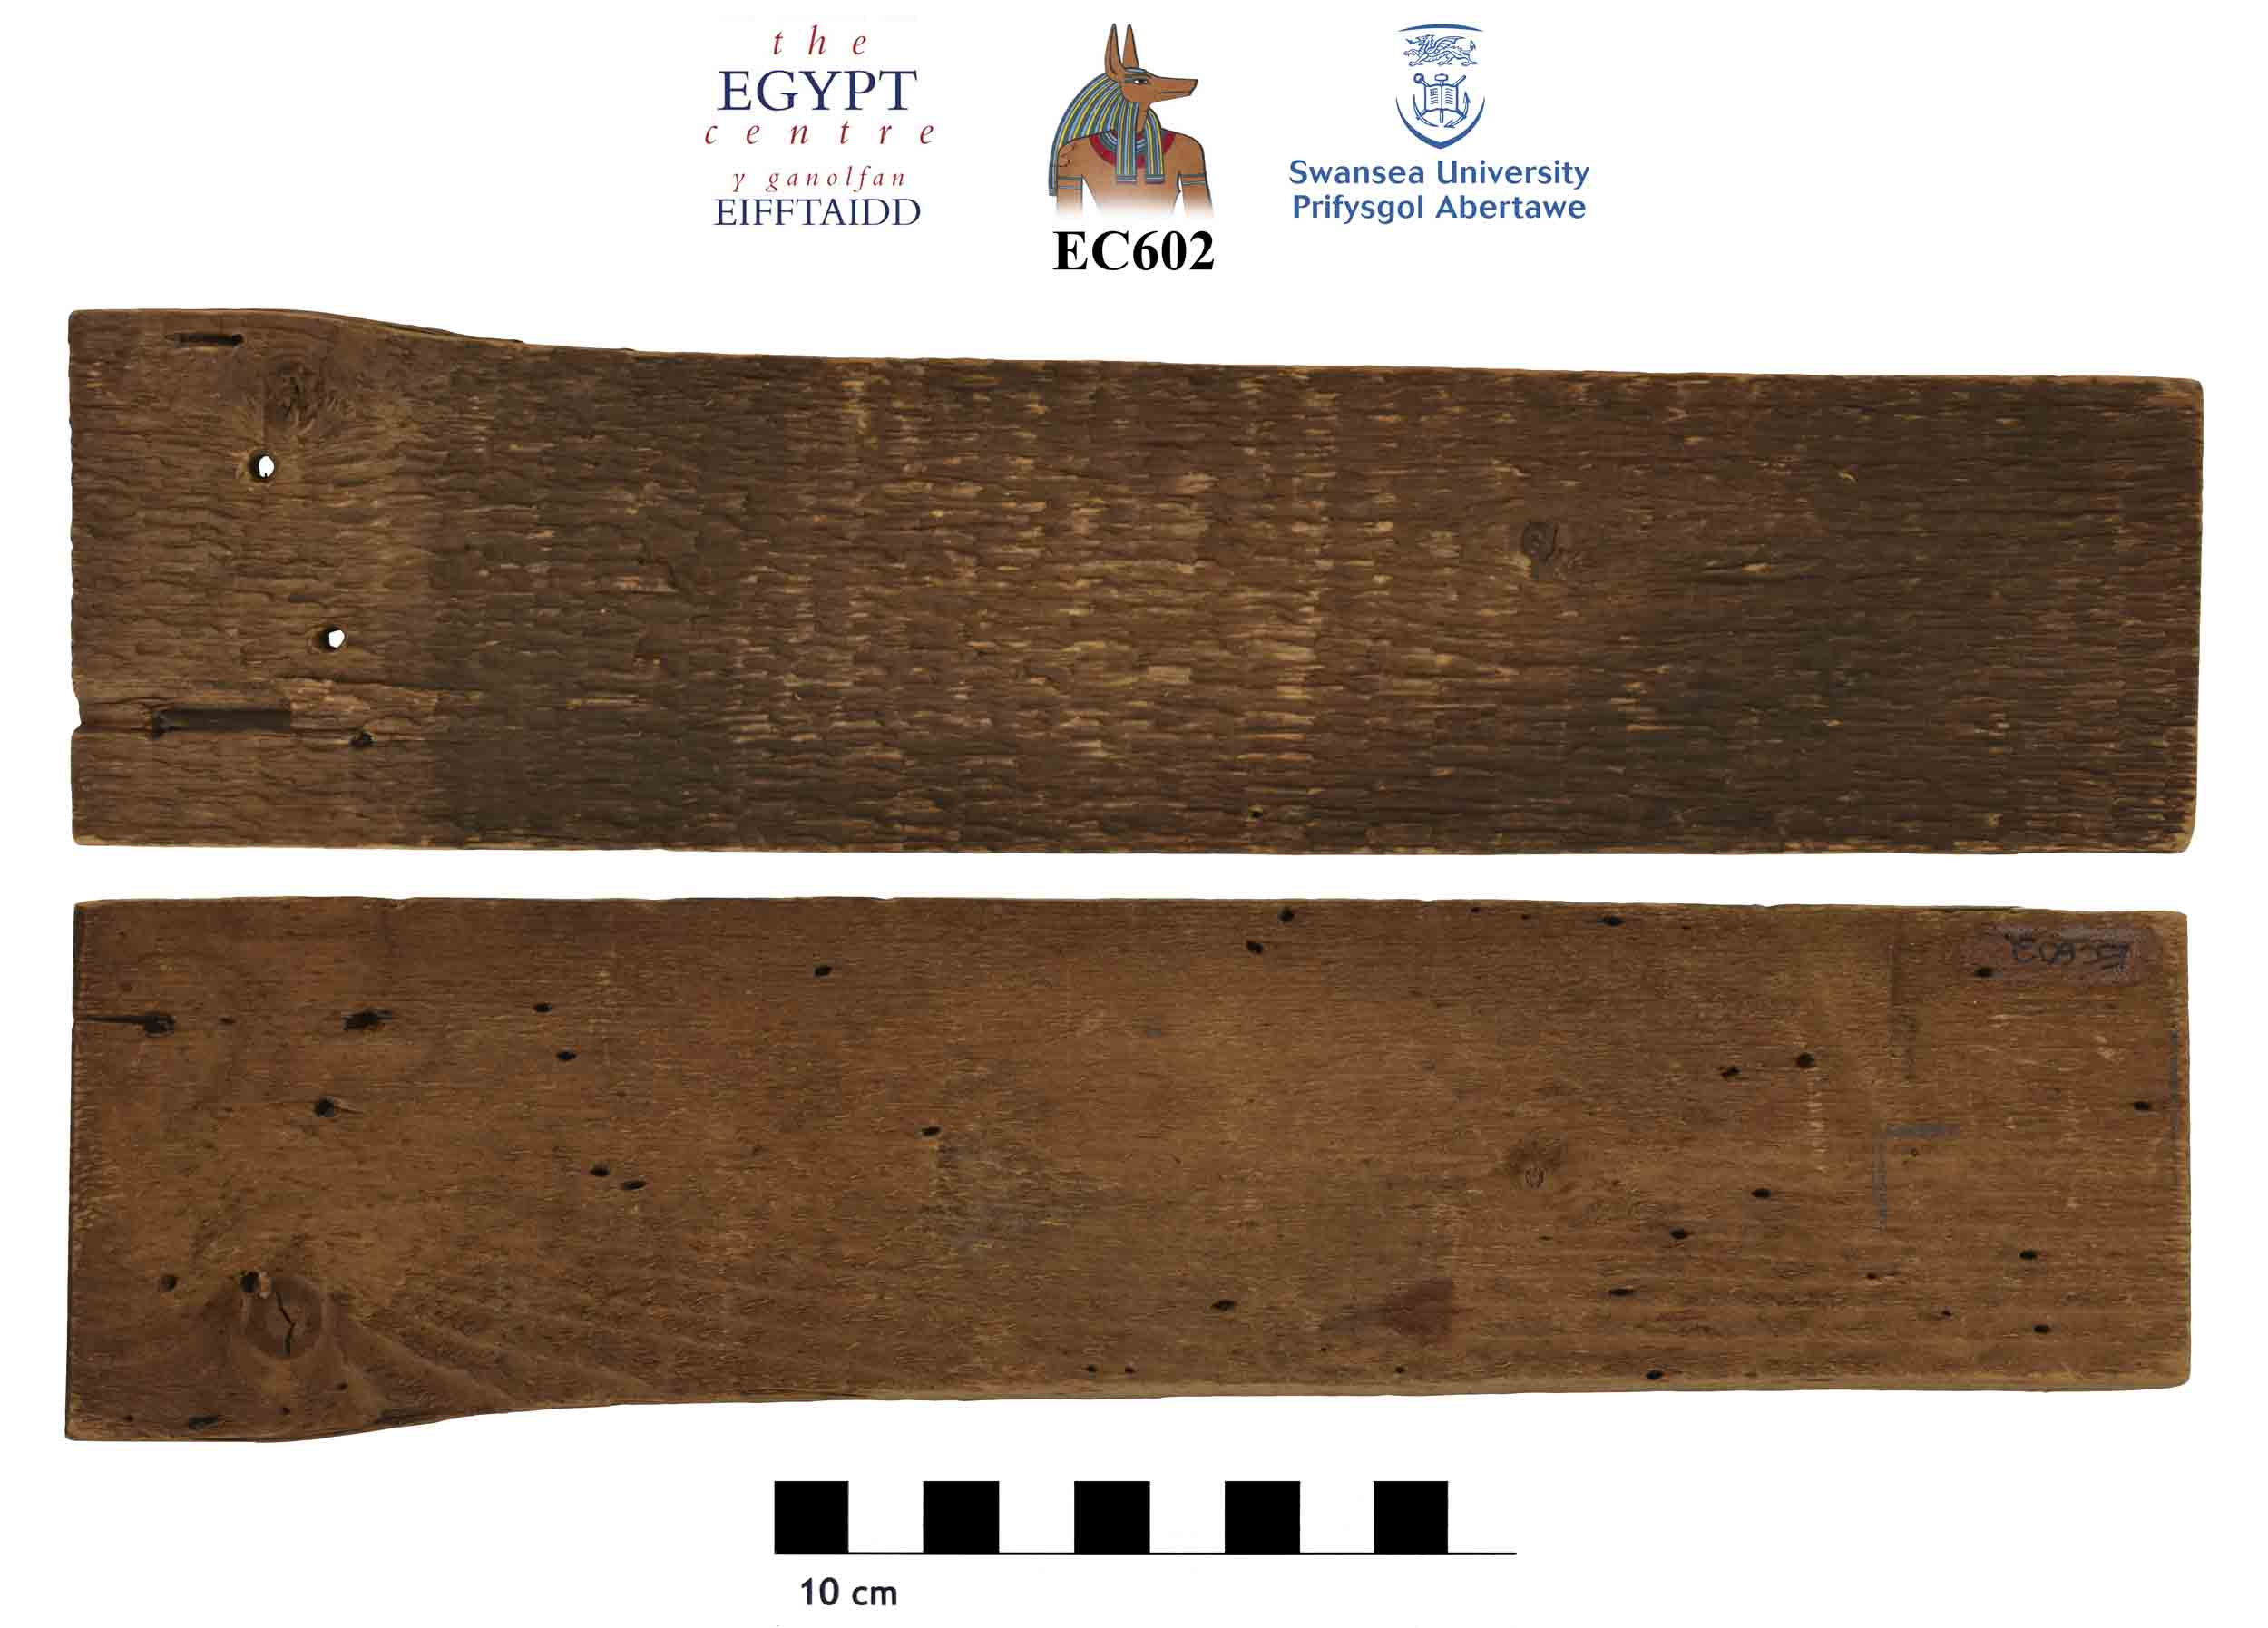 Image for: Wooden object, possibly a base from a funerary figure, or part of a coffin